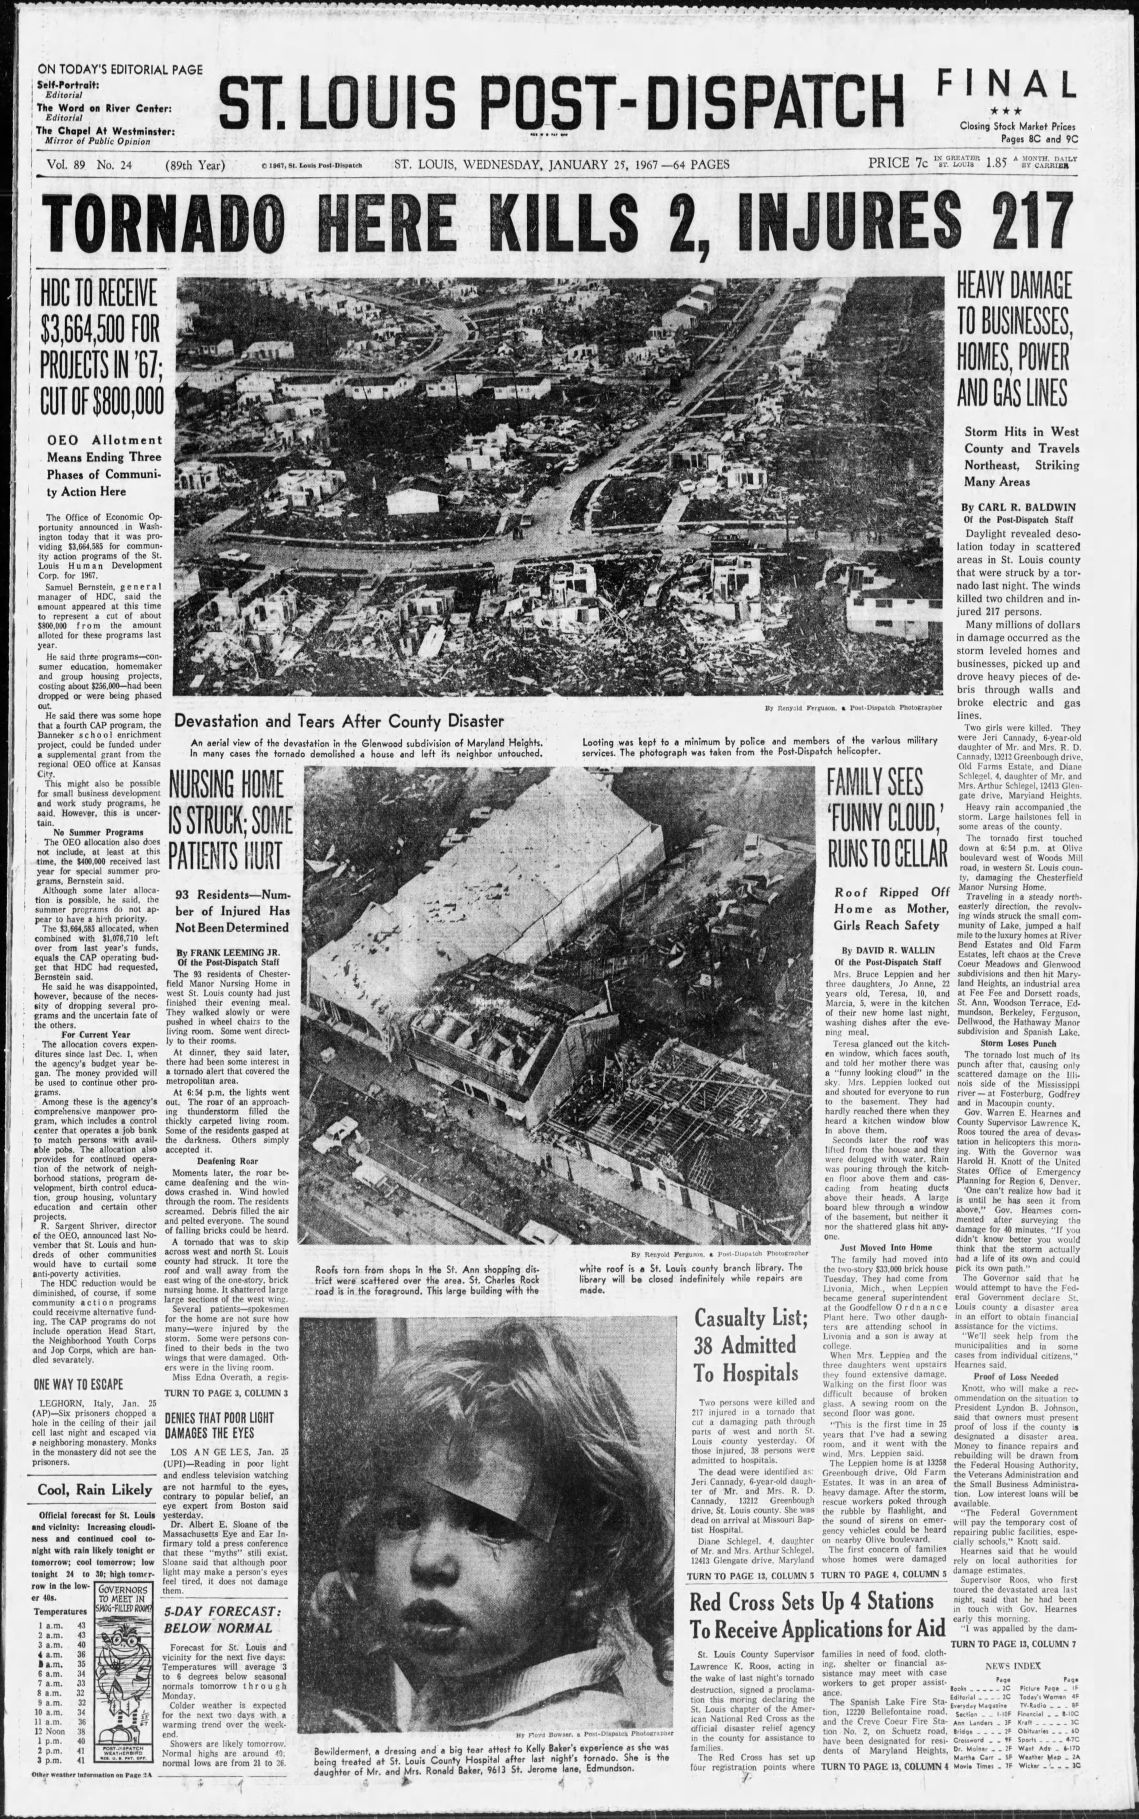 Post-Dispatch pages: The Tornado of 1967 | Post-Dispatch Archives | www.waldenwongart.com